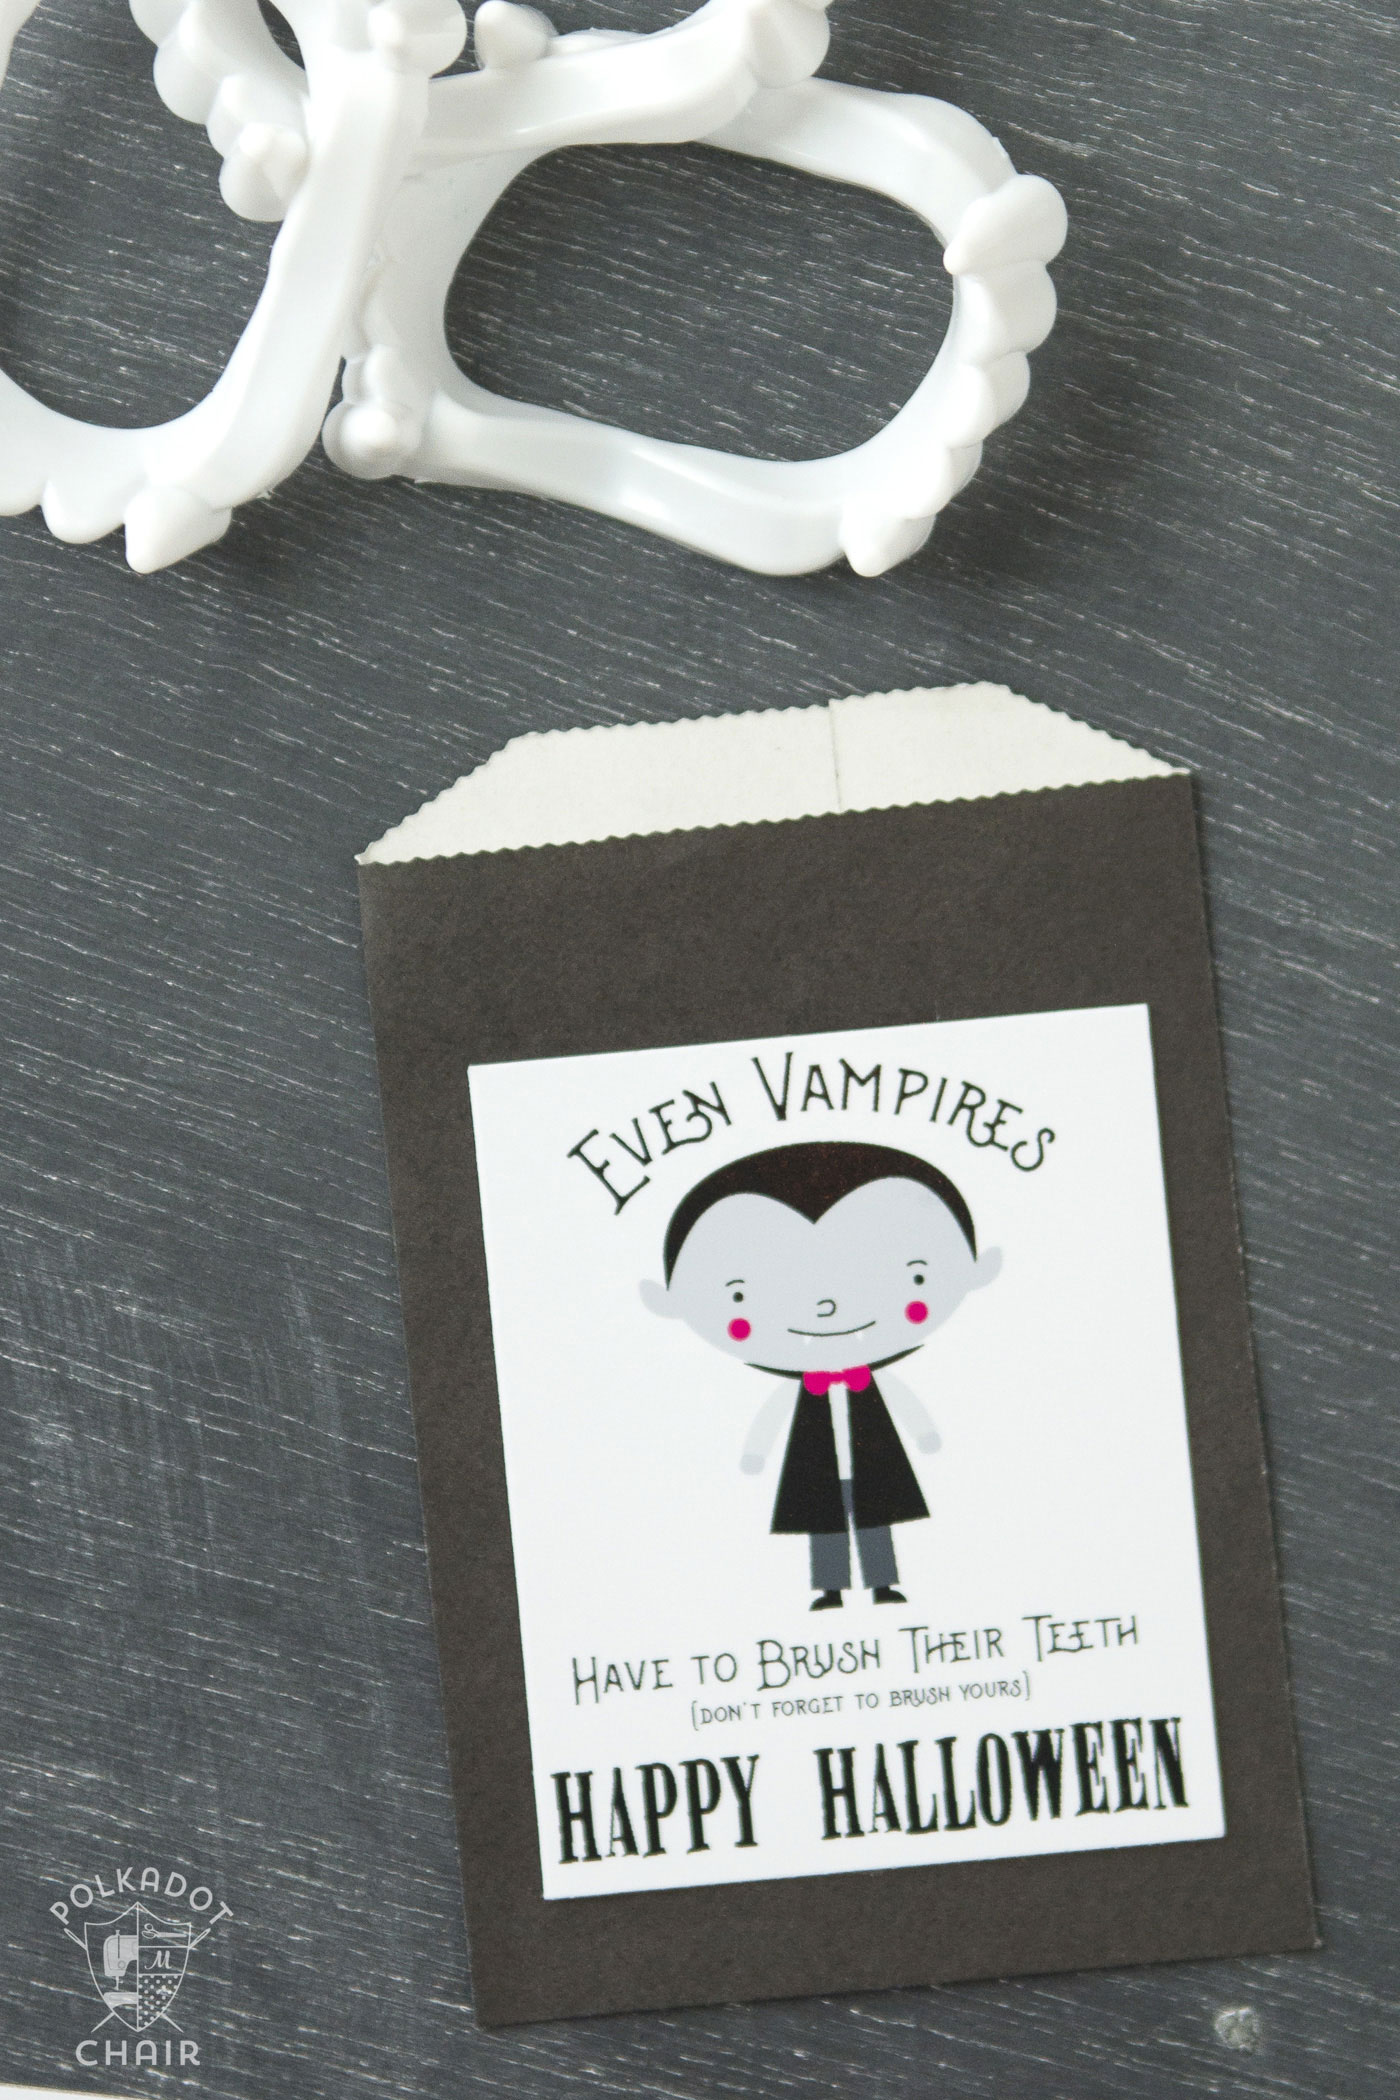 Cute non-candy Halloween Treat idea - free printable tags to attach to vampire teeth! 